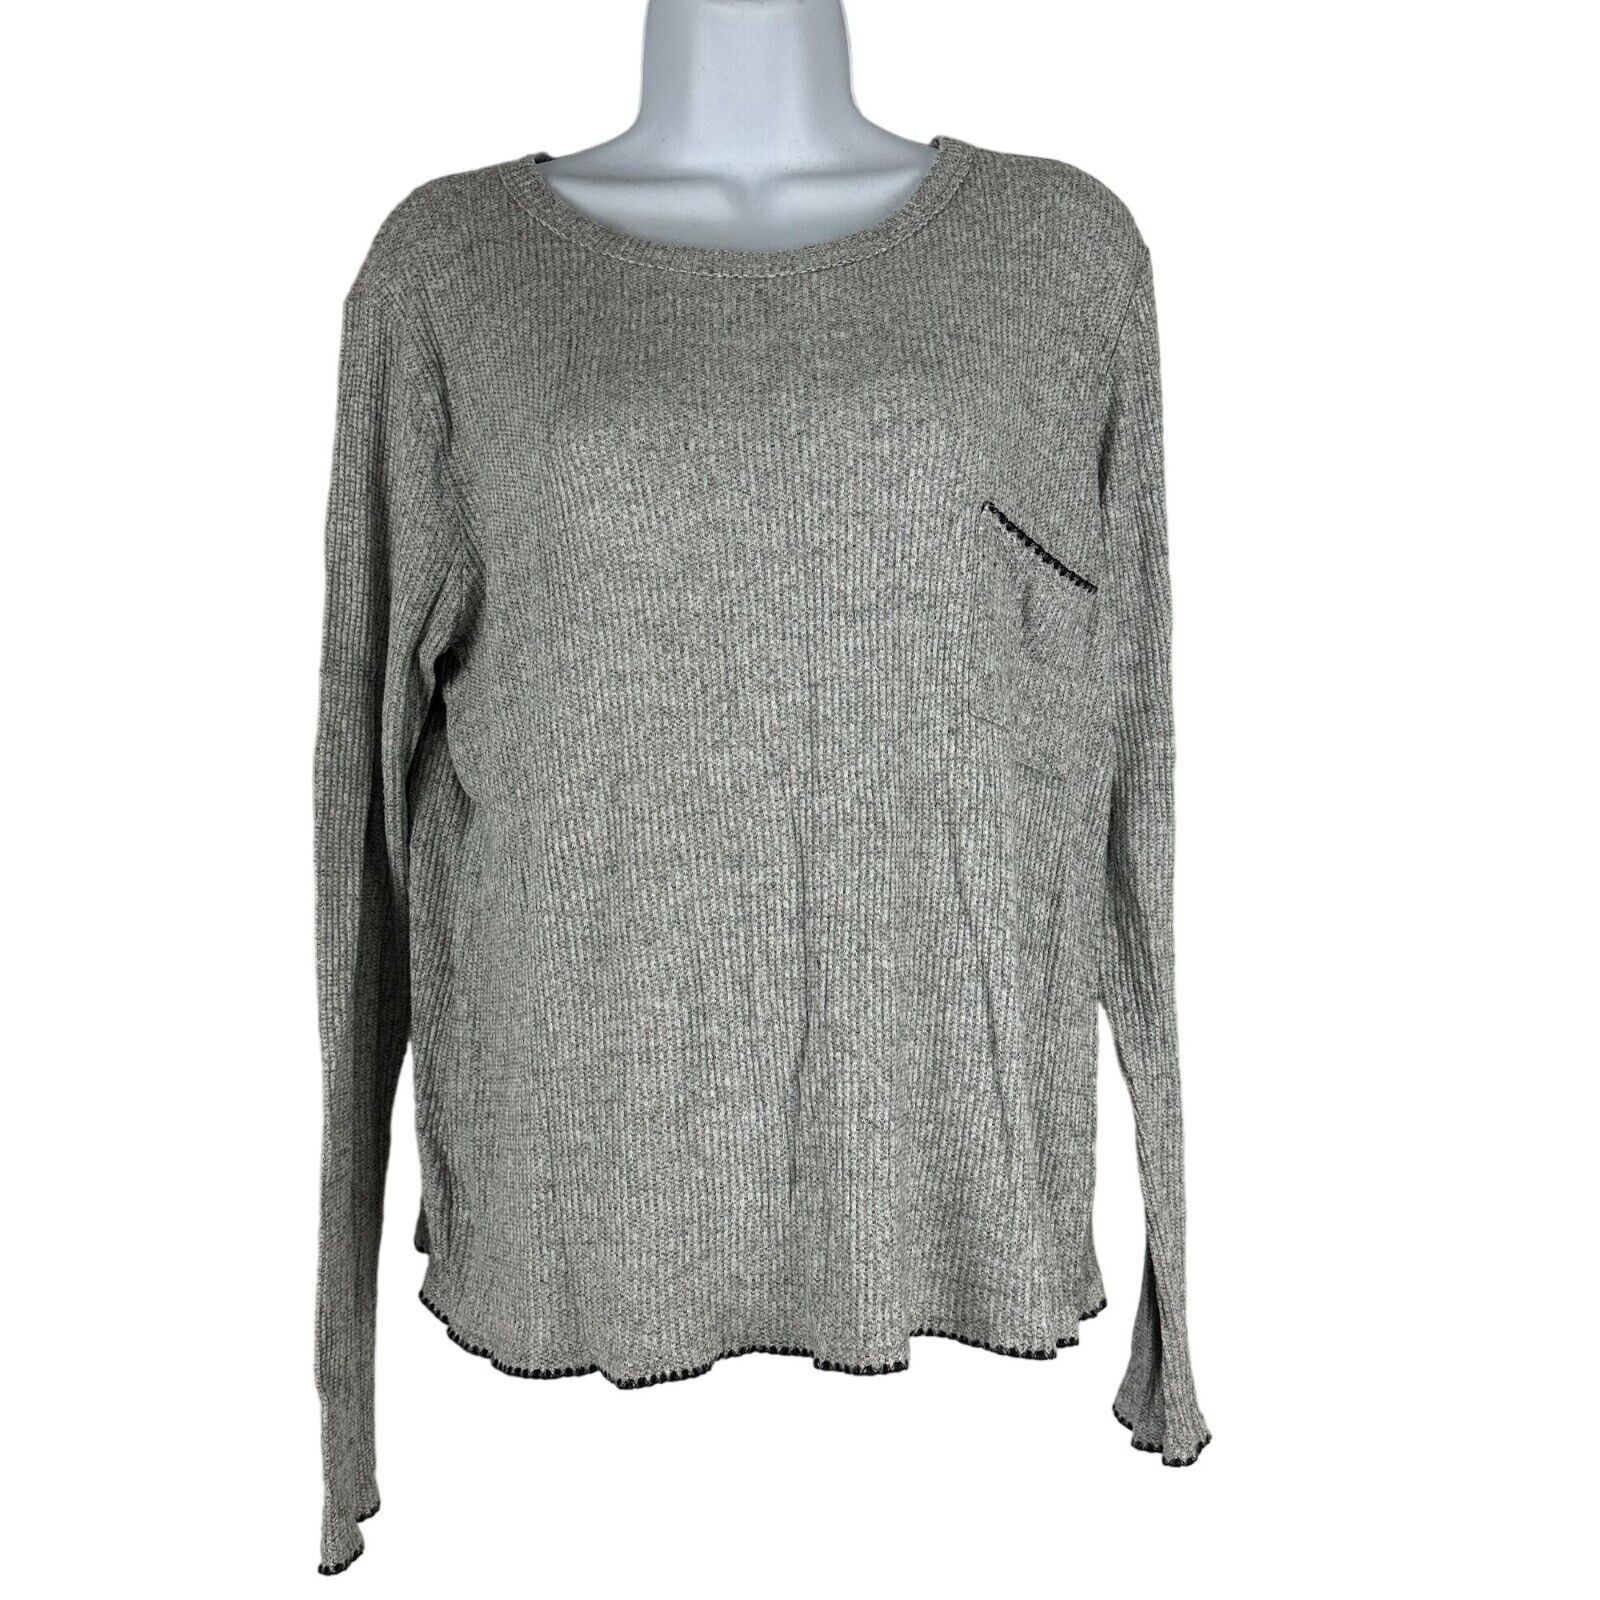 Primary image for Ginger G Women's Gray Long Sleeved Pajama Top Size L